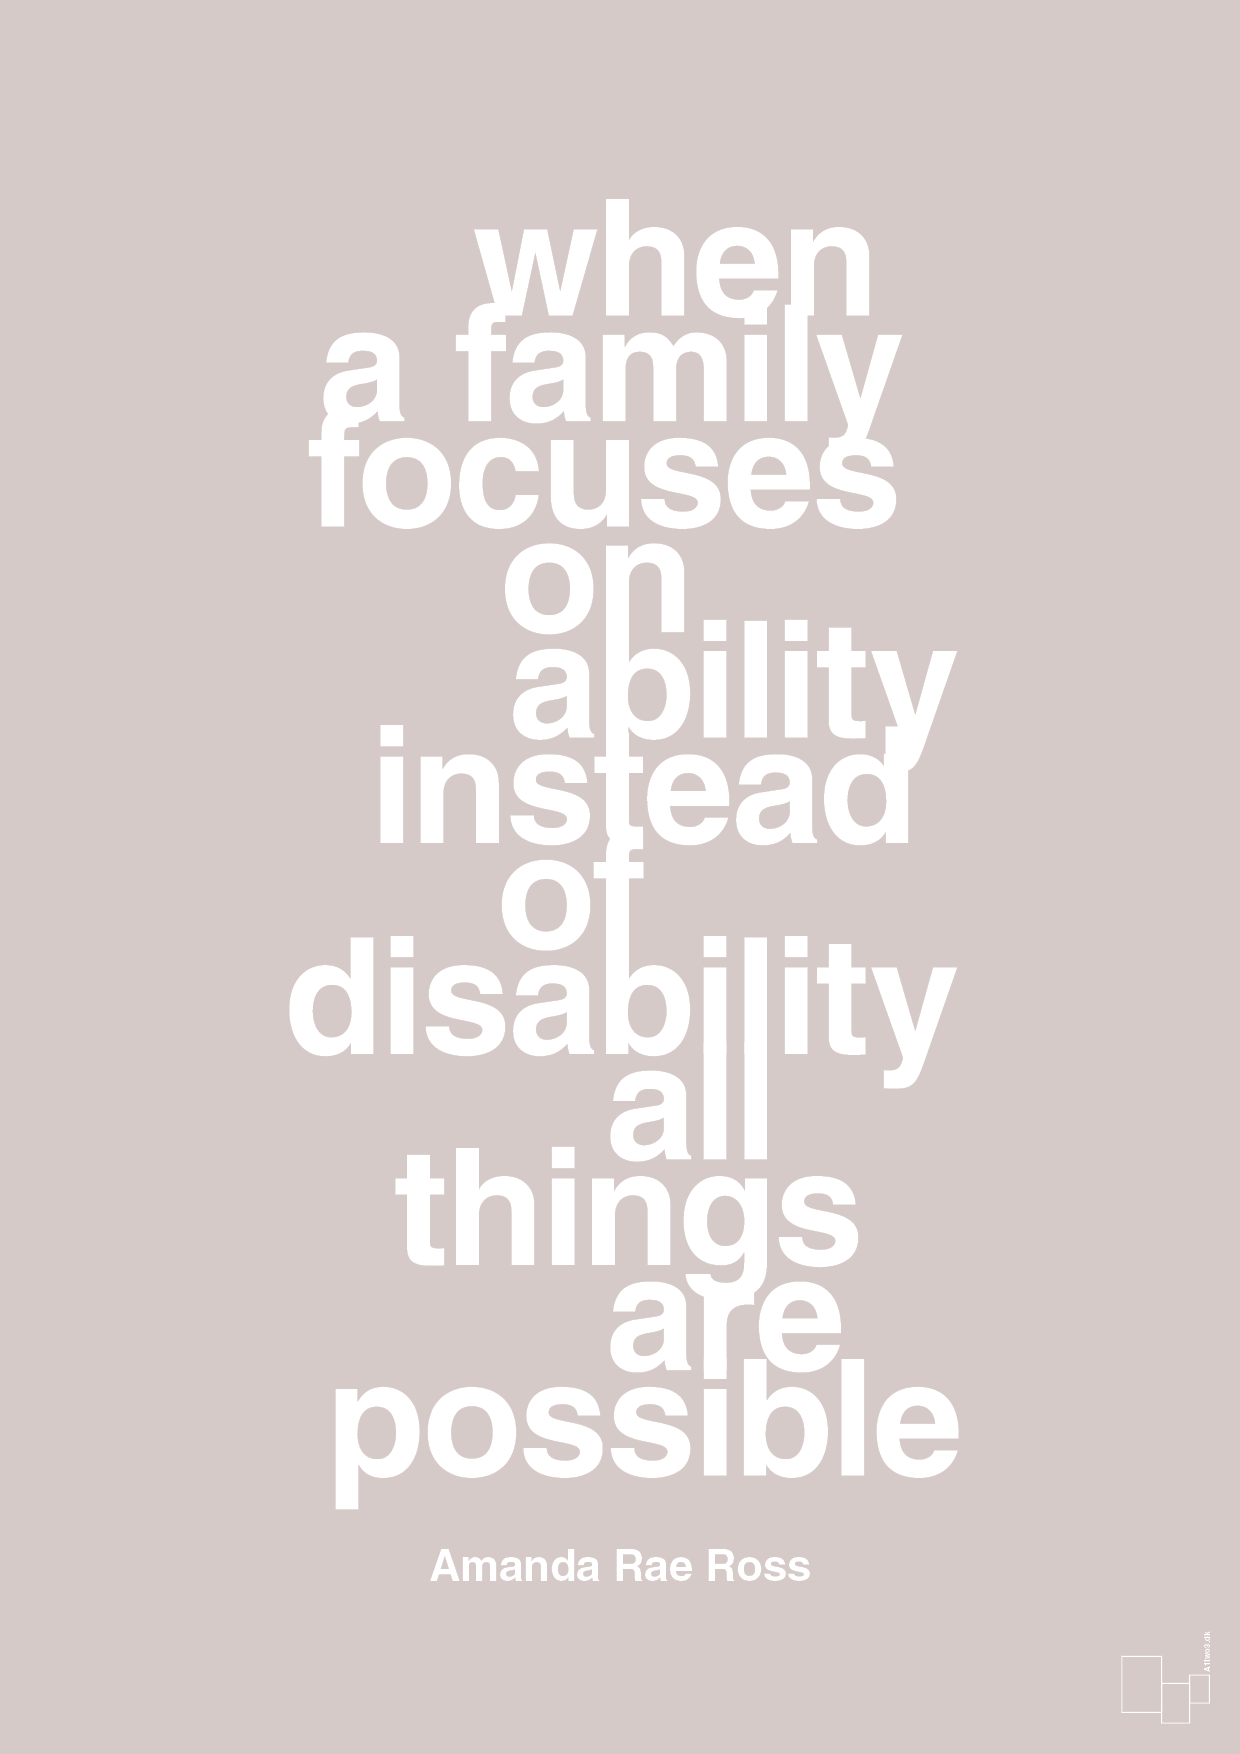 when a family focuses on ability instead of disability all things are possible - Plakat med Samfund i Broken Beige